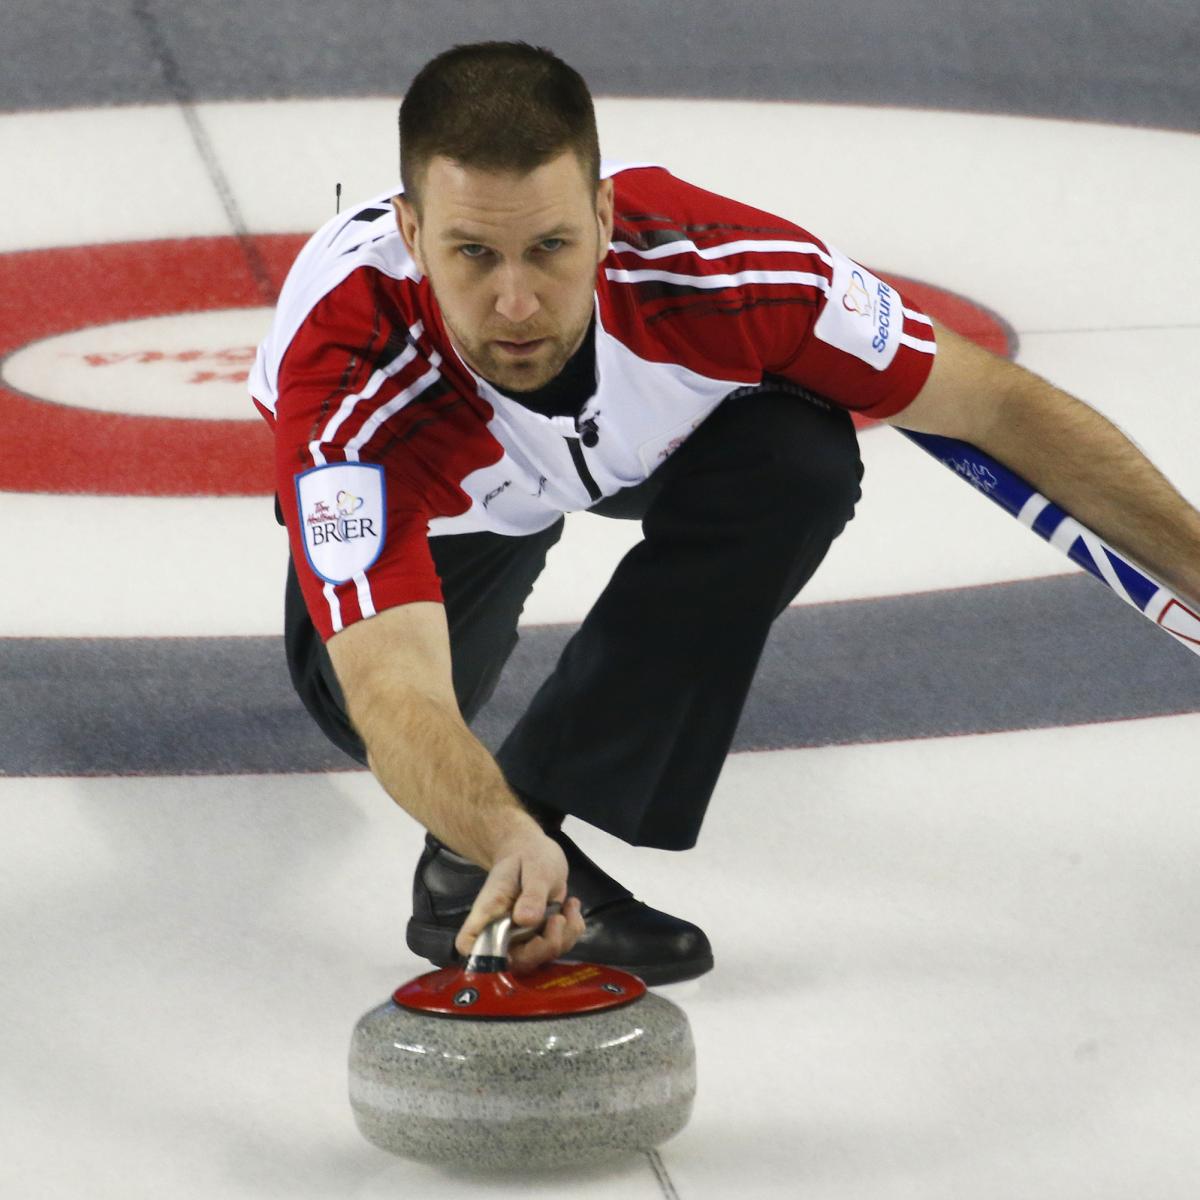 Tim Hortons Brier 2020: Updated Curling Draw, Schedule After Saturday's